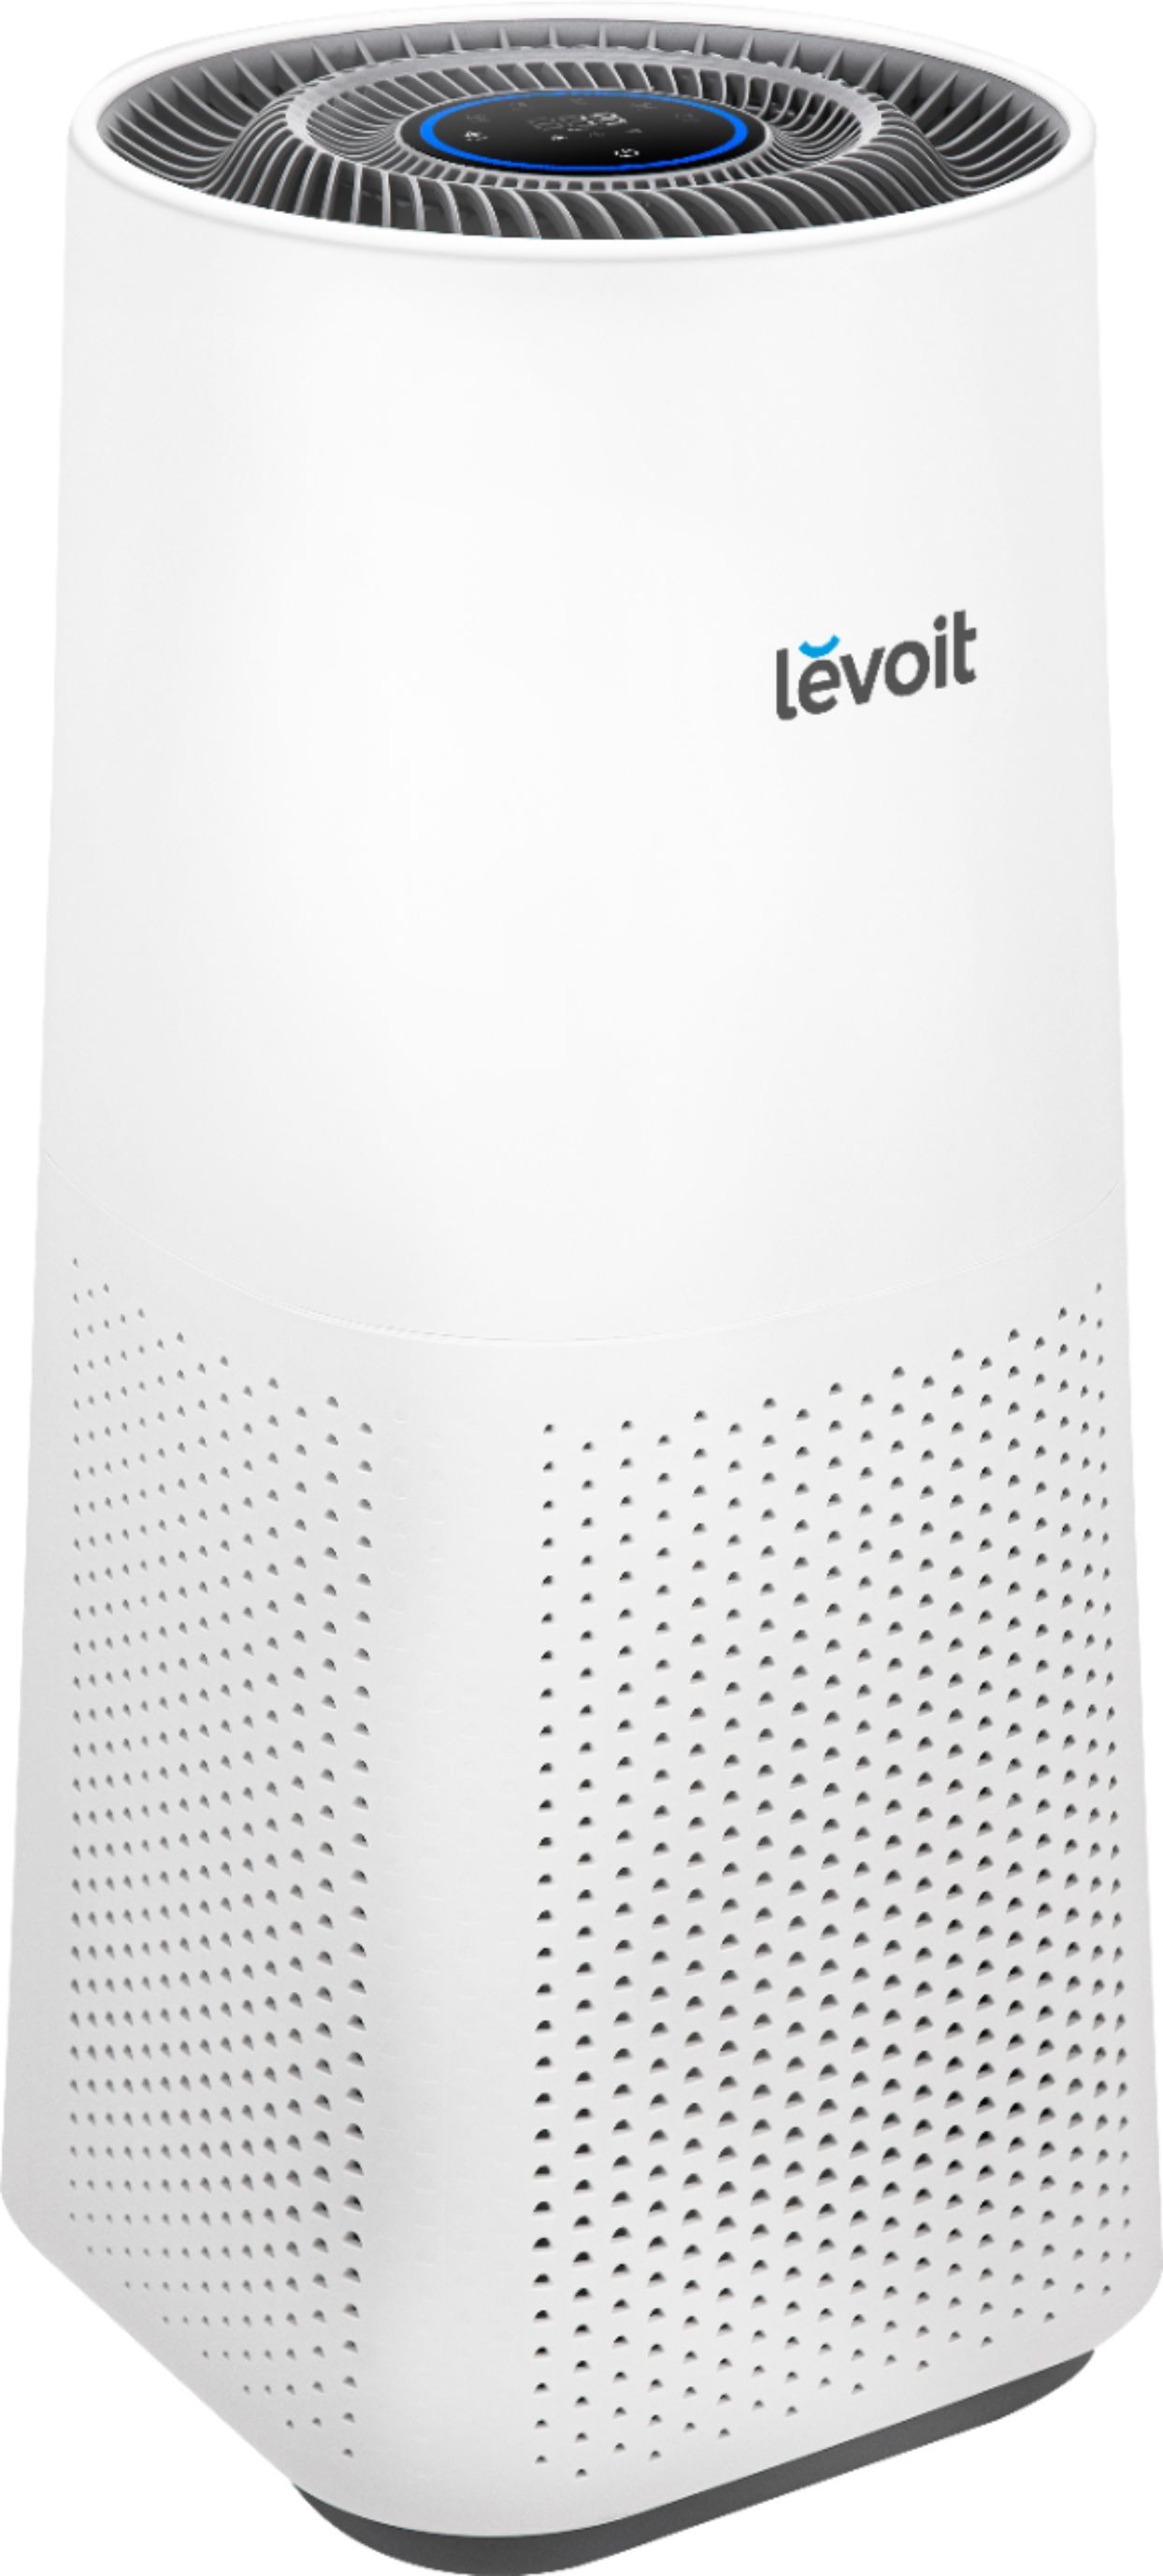 Angle View: Levoit - Airzone 710 Sq. Ft True HEPA Air Purifier - White